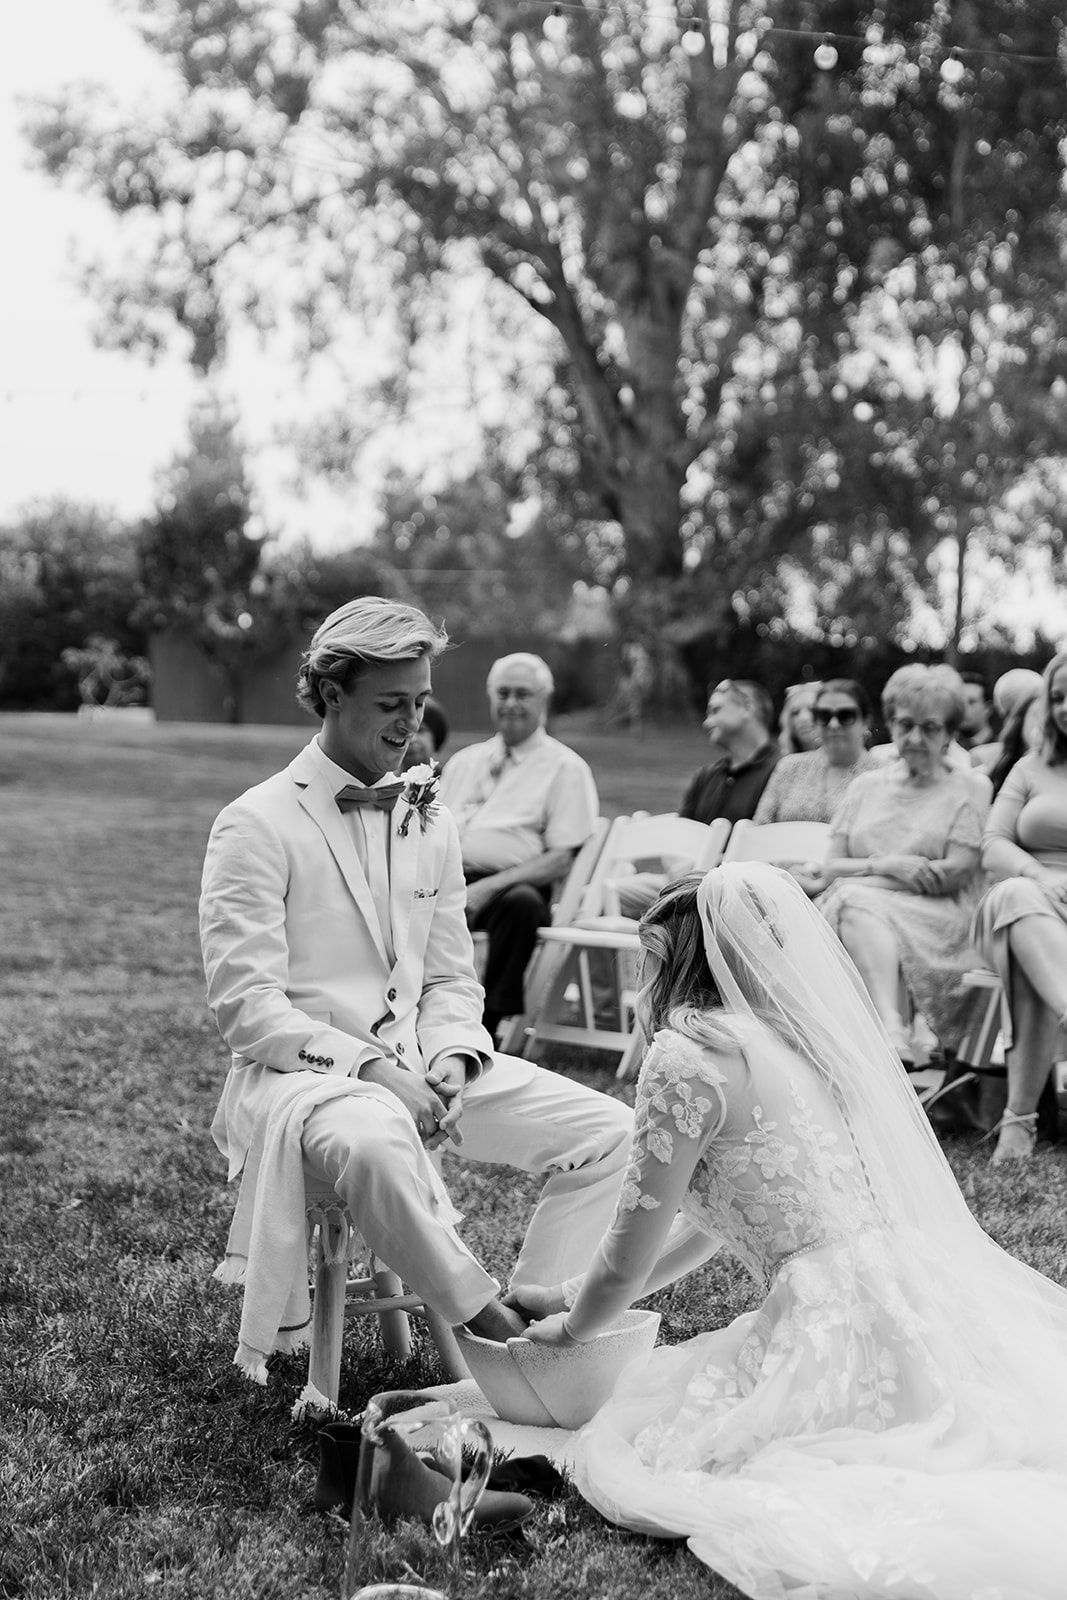 bride and groom have an intimate foot washing during ceremony